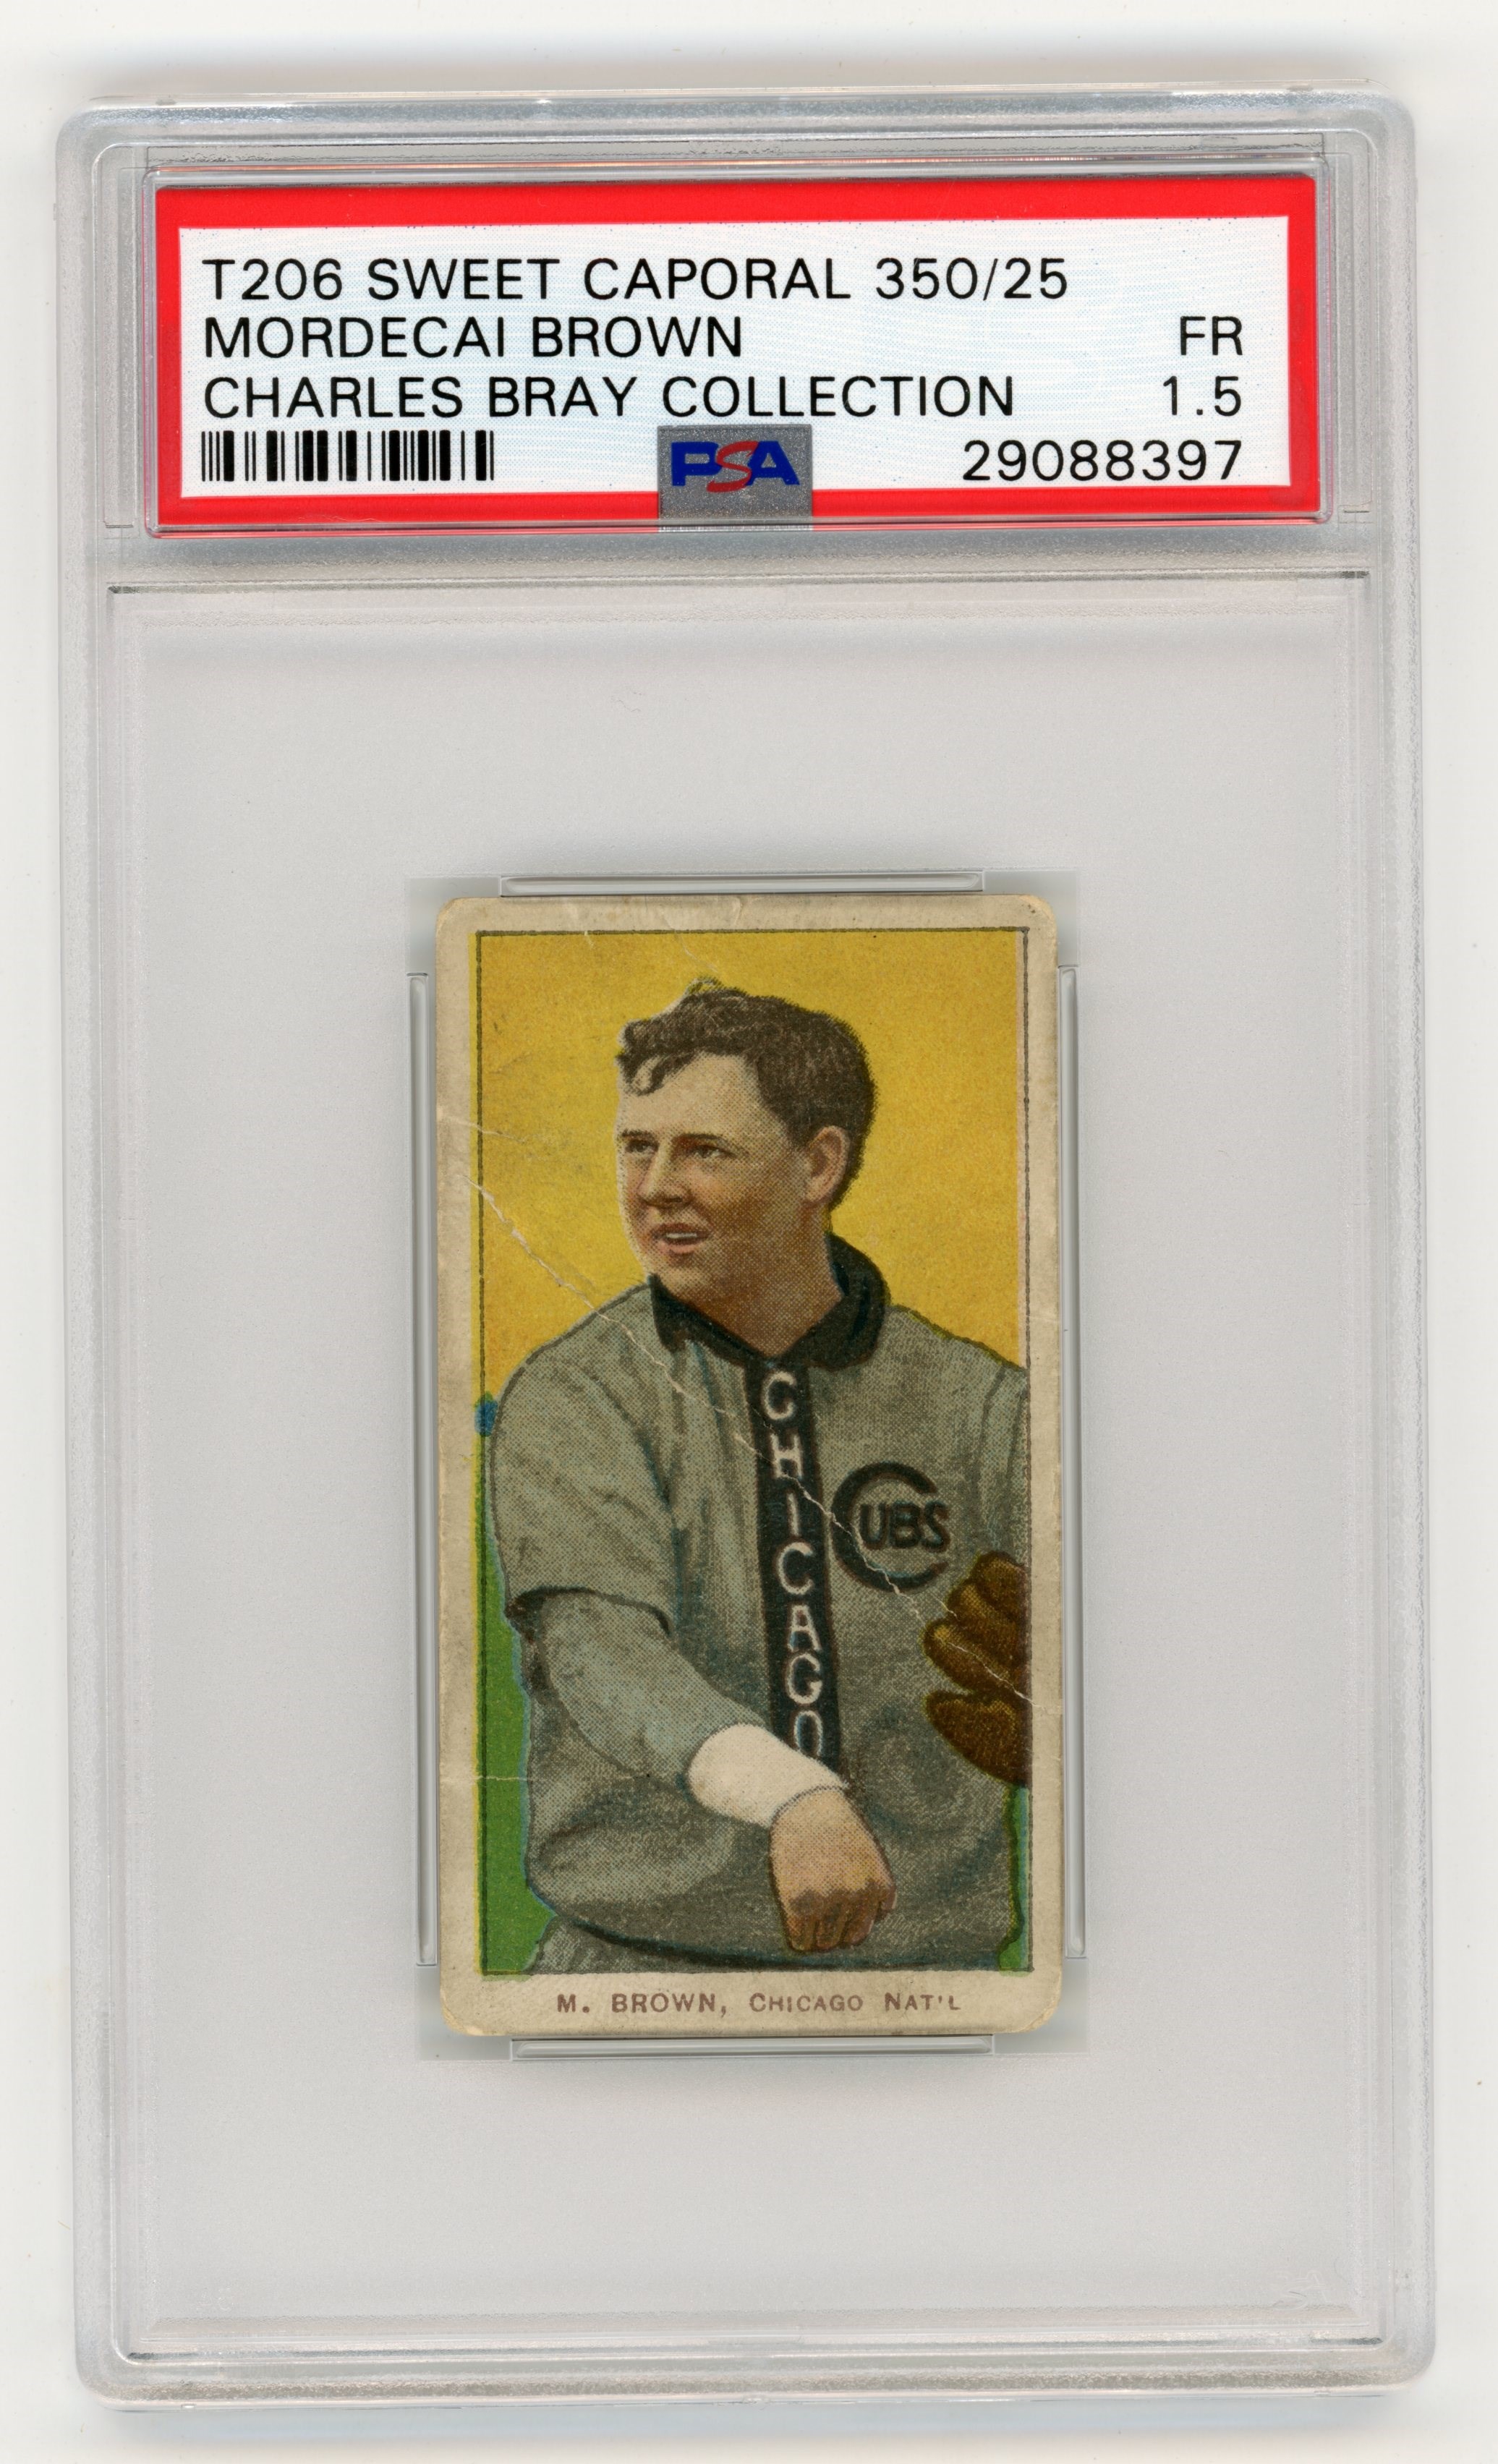 Baseball and Trading Cards - T206 Sweet Caporal 350/25 Mordecai Brown PSA 1.5 From The Charles Bray Collection